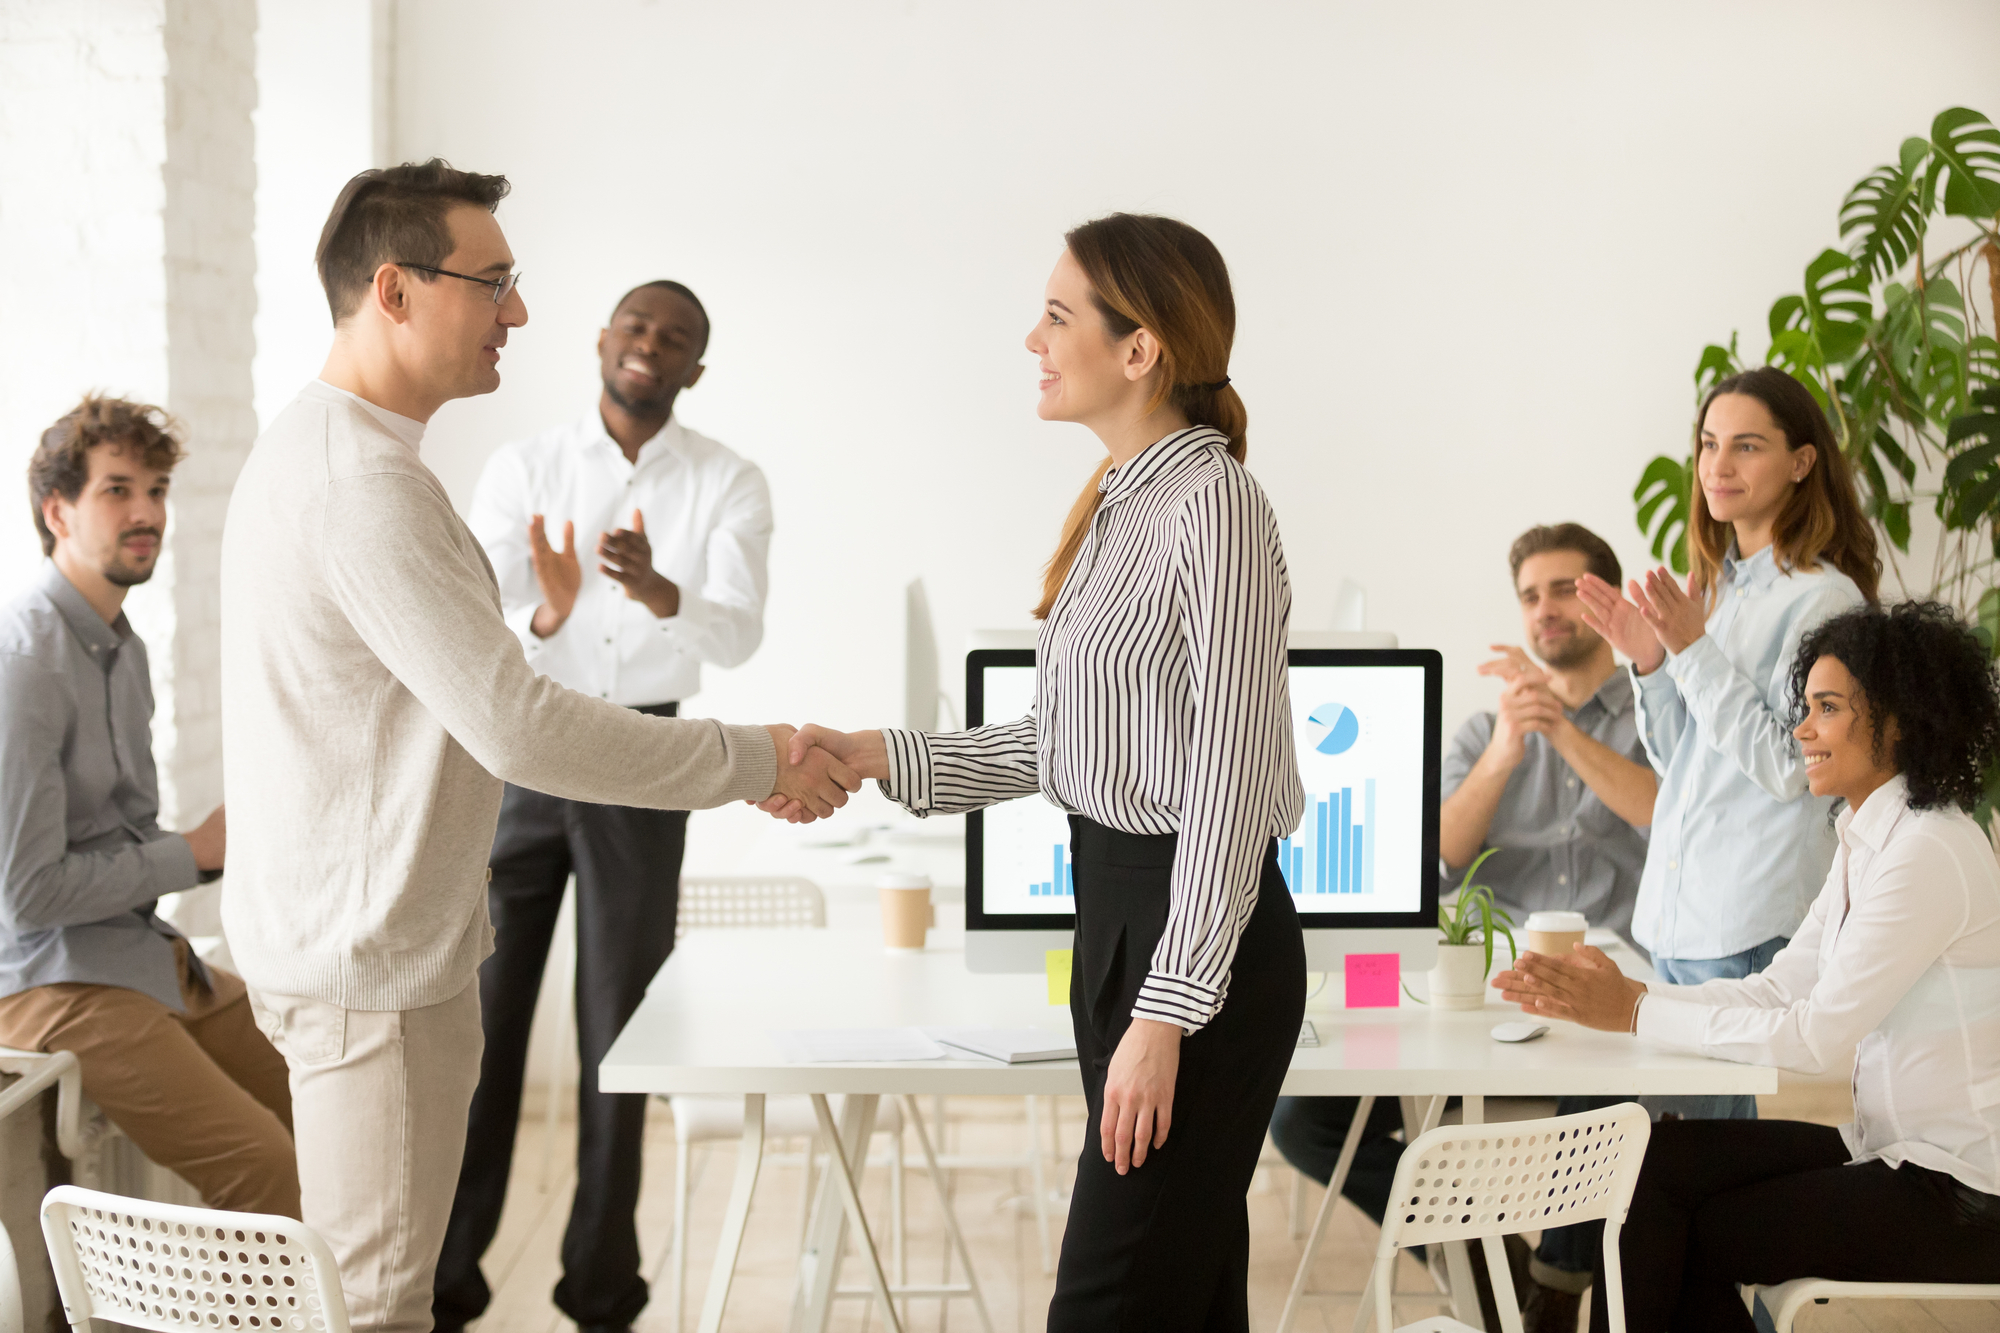 The Difference Between Employee Recognition and Team Recognition